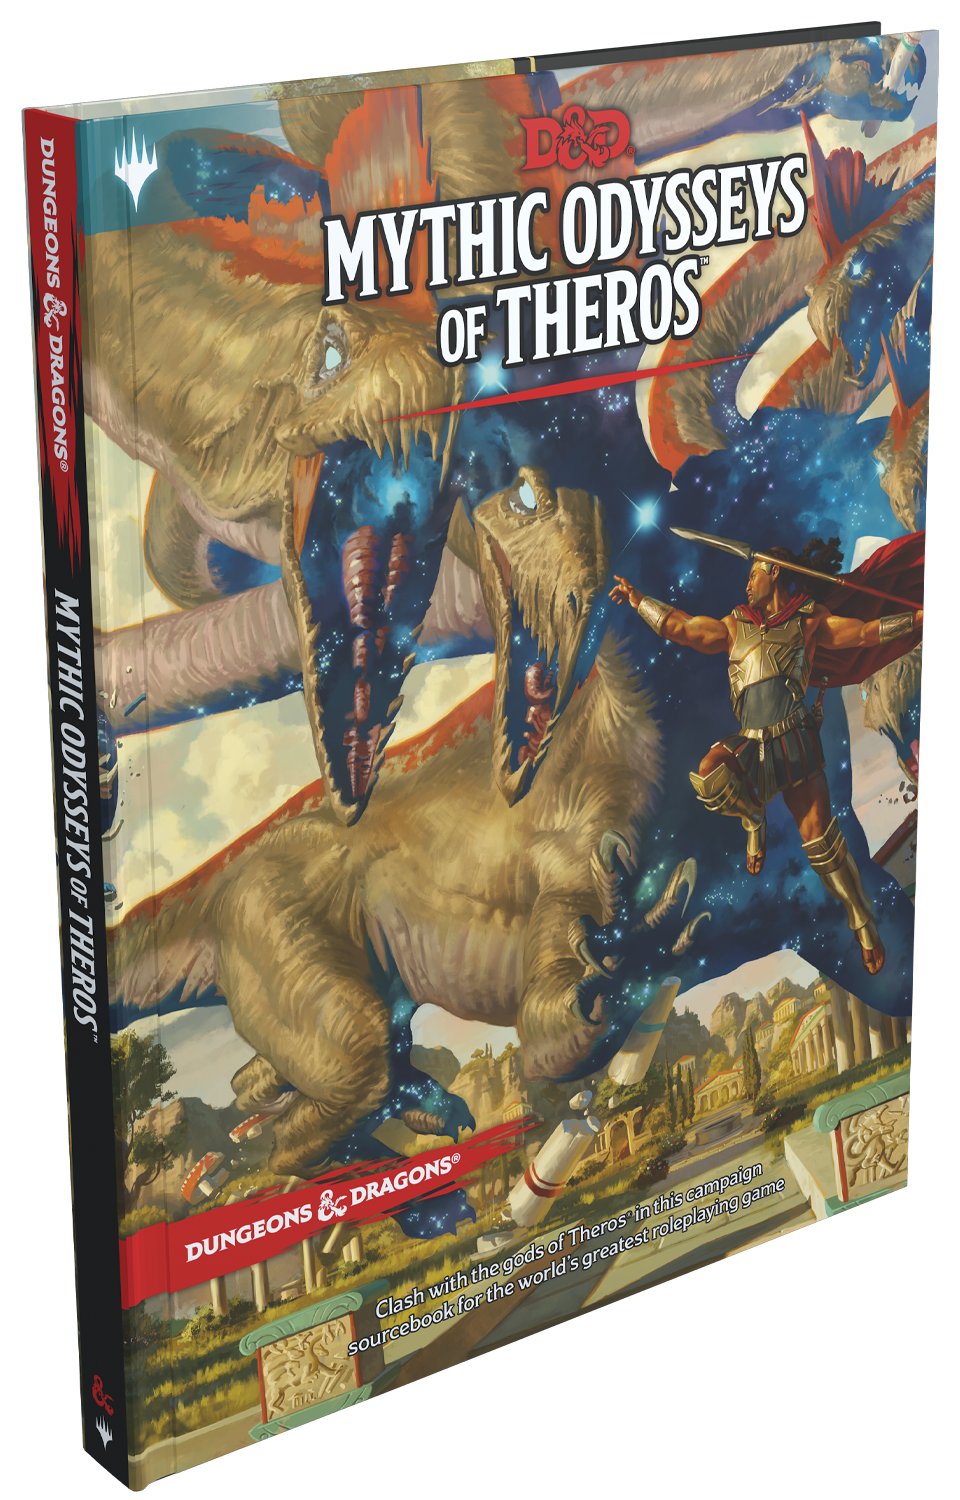 Dungeons & Dragons 5th edition - Mythic Odysseys of Theros